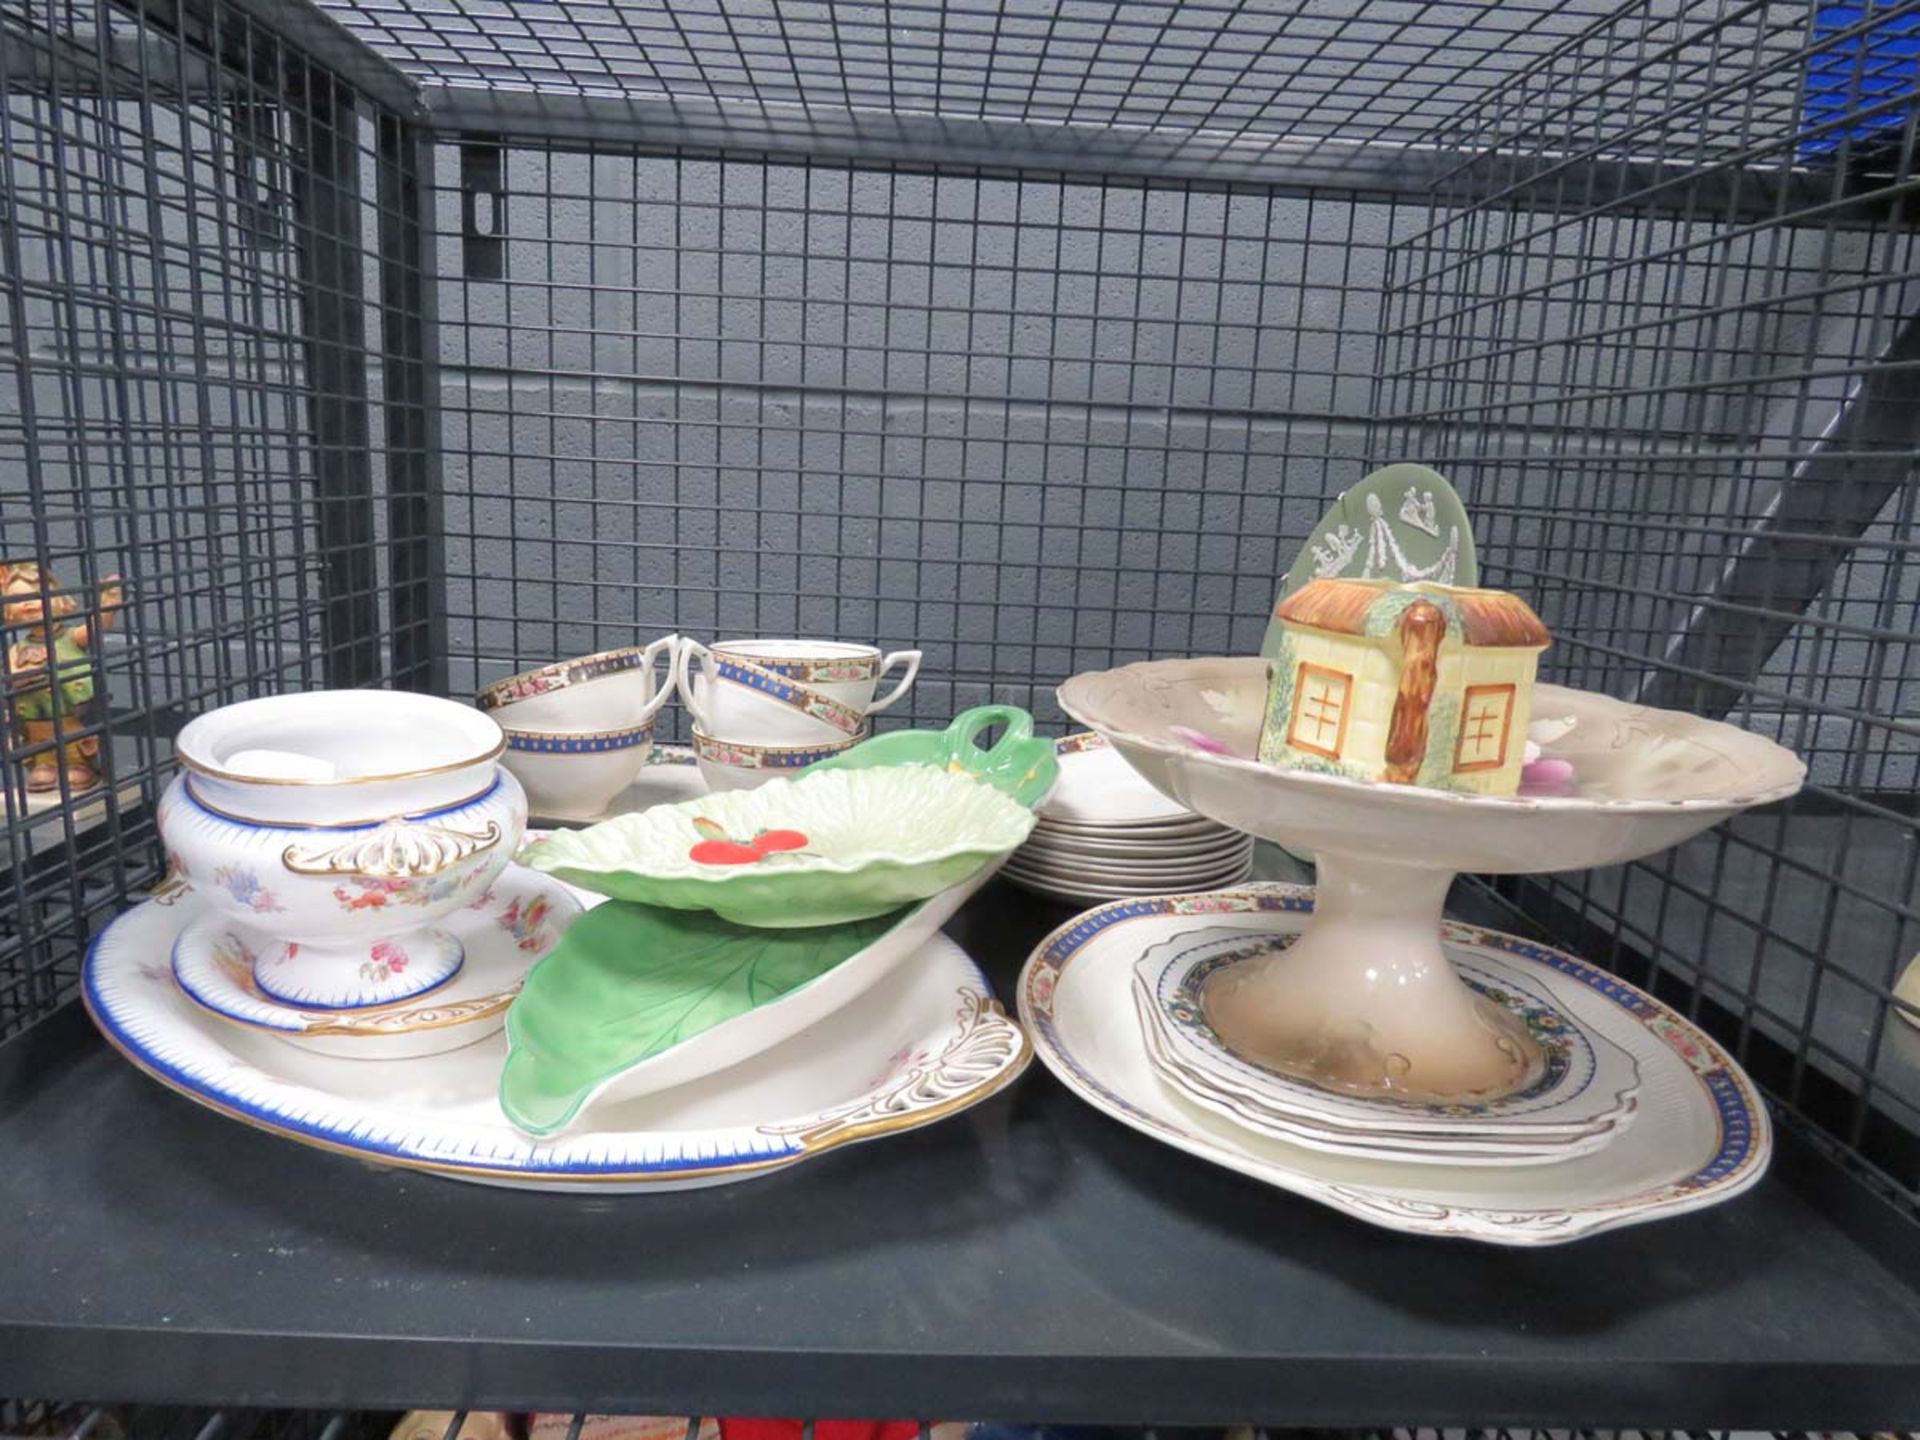 Cage containing floral patterned crockery plus Carlton ware, Jasper ware and cake dish